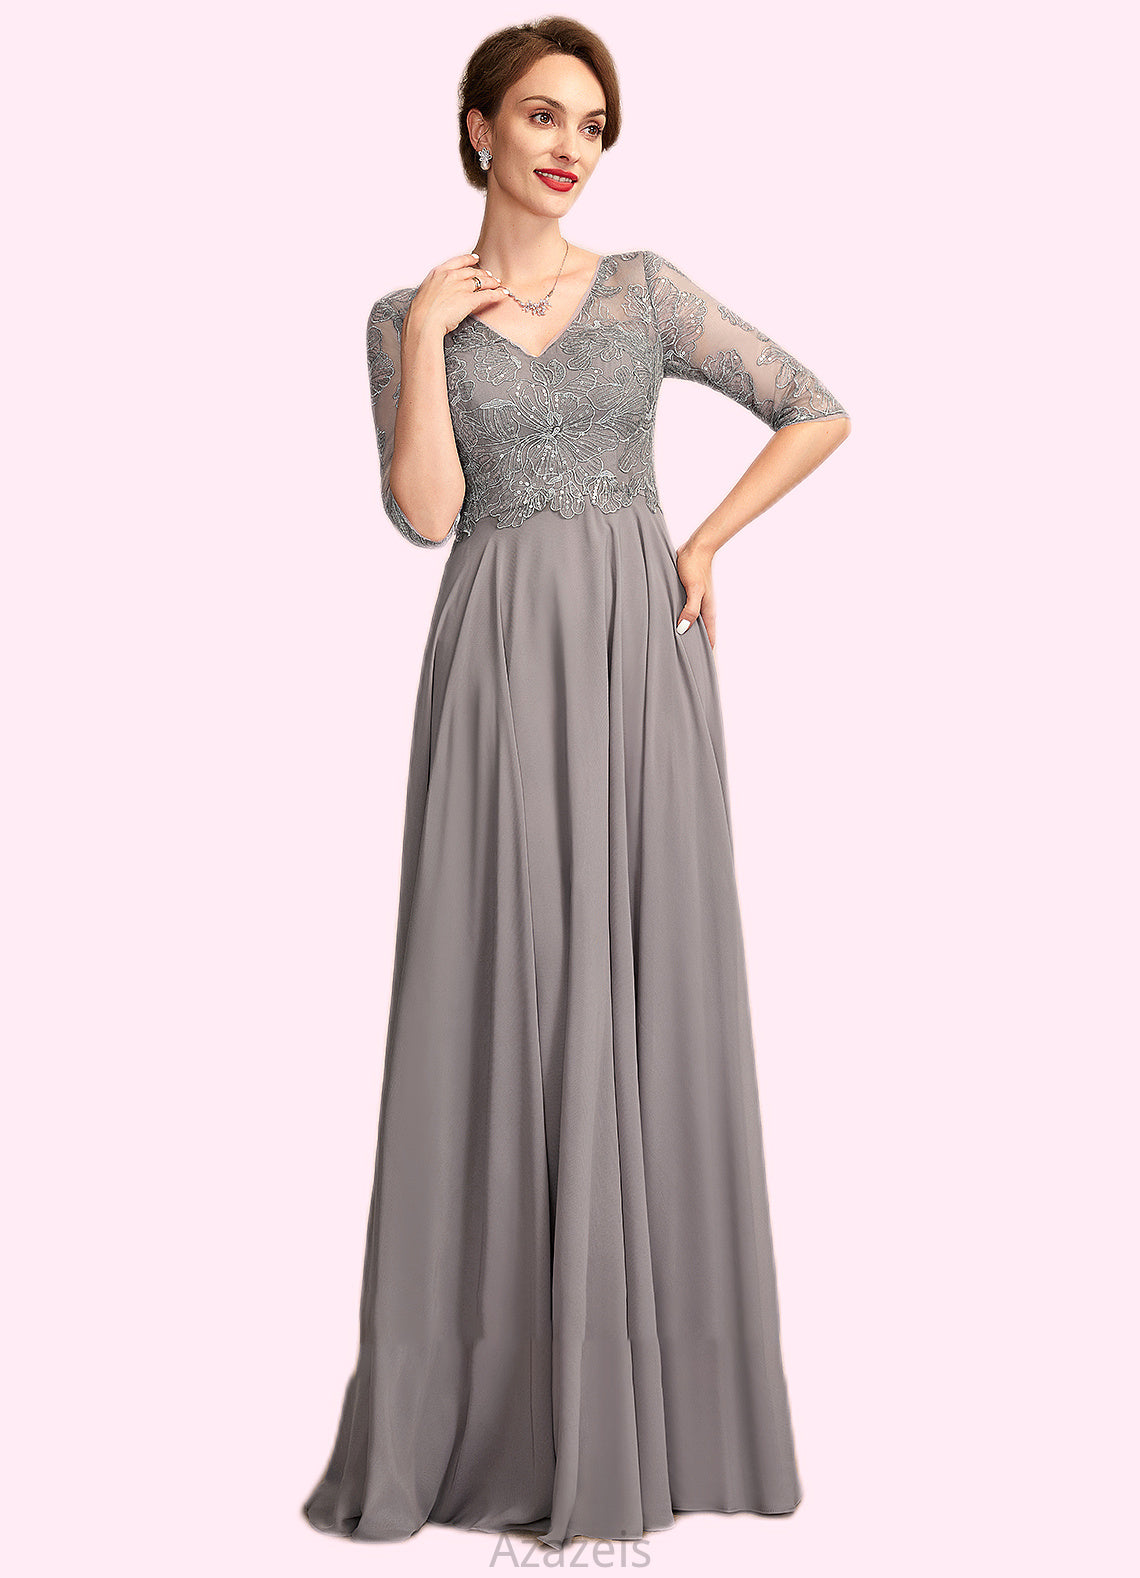 Gia A-Line V-neck Floor-Length Chiffon Lace Mother of the Bride Dress With Sequins DF126P0014999